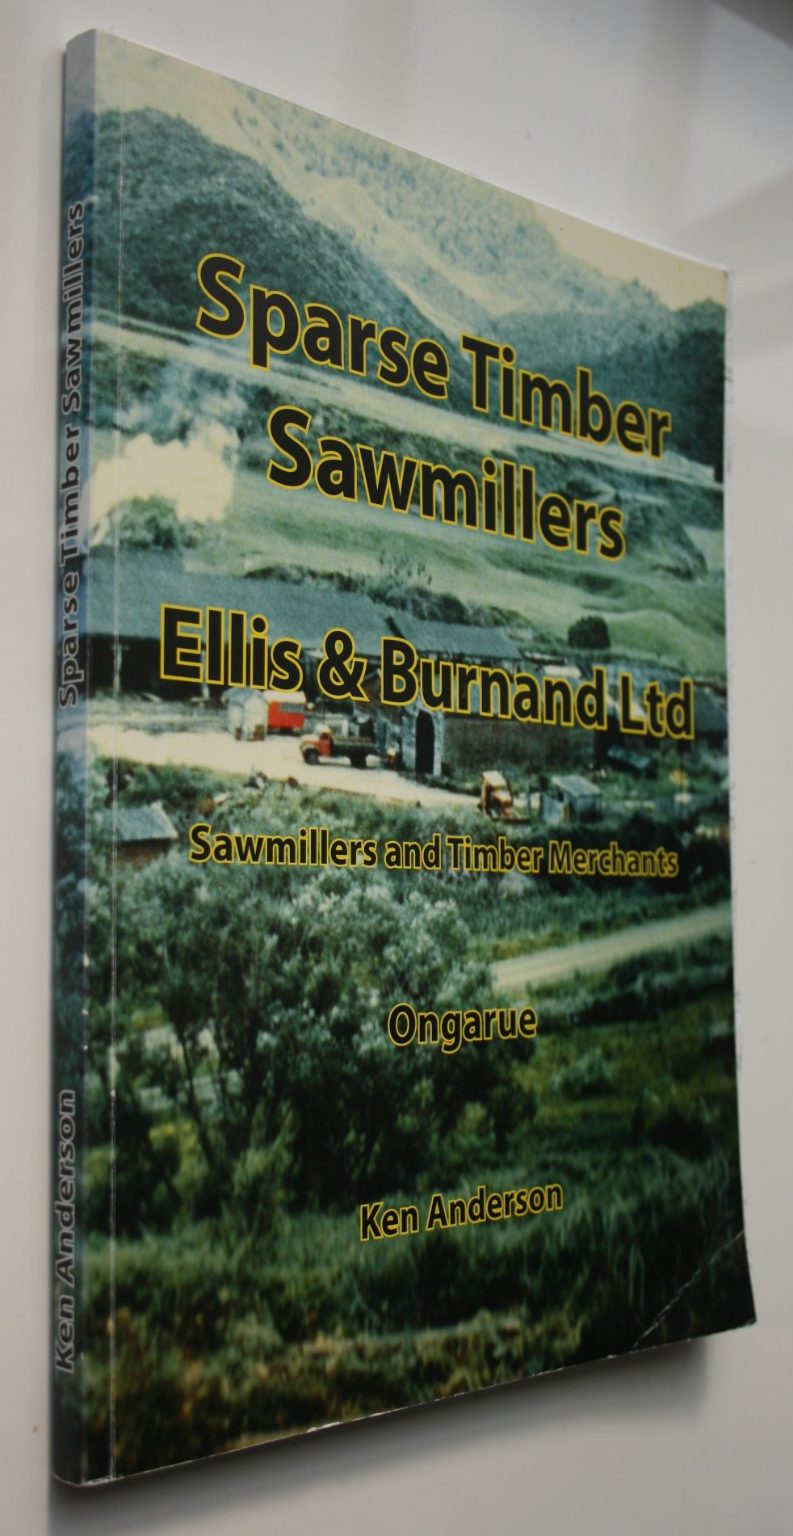 Sparse Timber Sawmillers. Ellis &amp; Burnand Ltd Sawmillers and Timber Merchants Ongarue BY Ken Anderson.